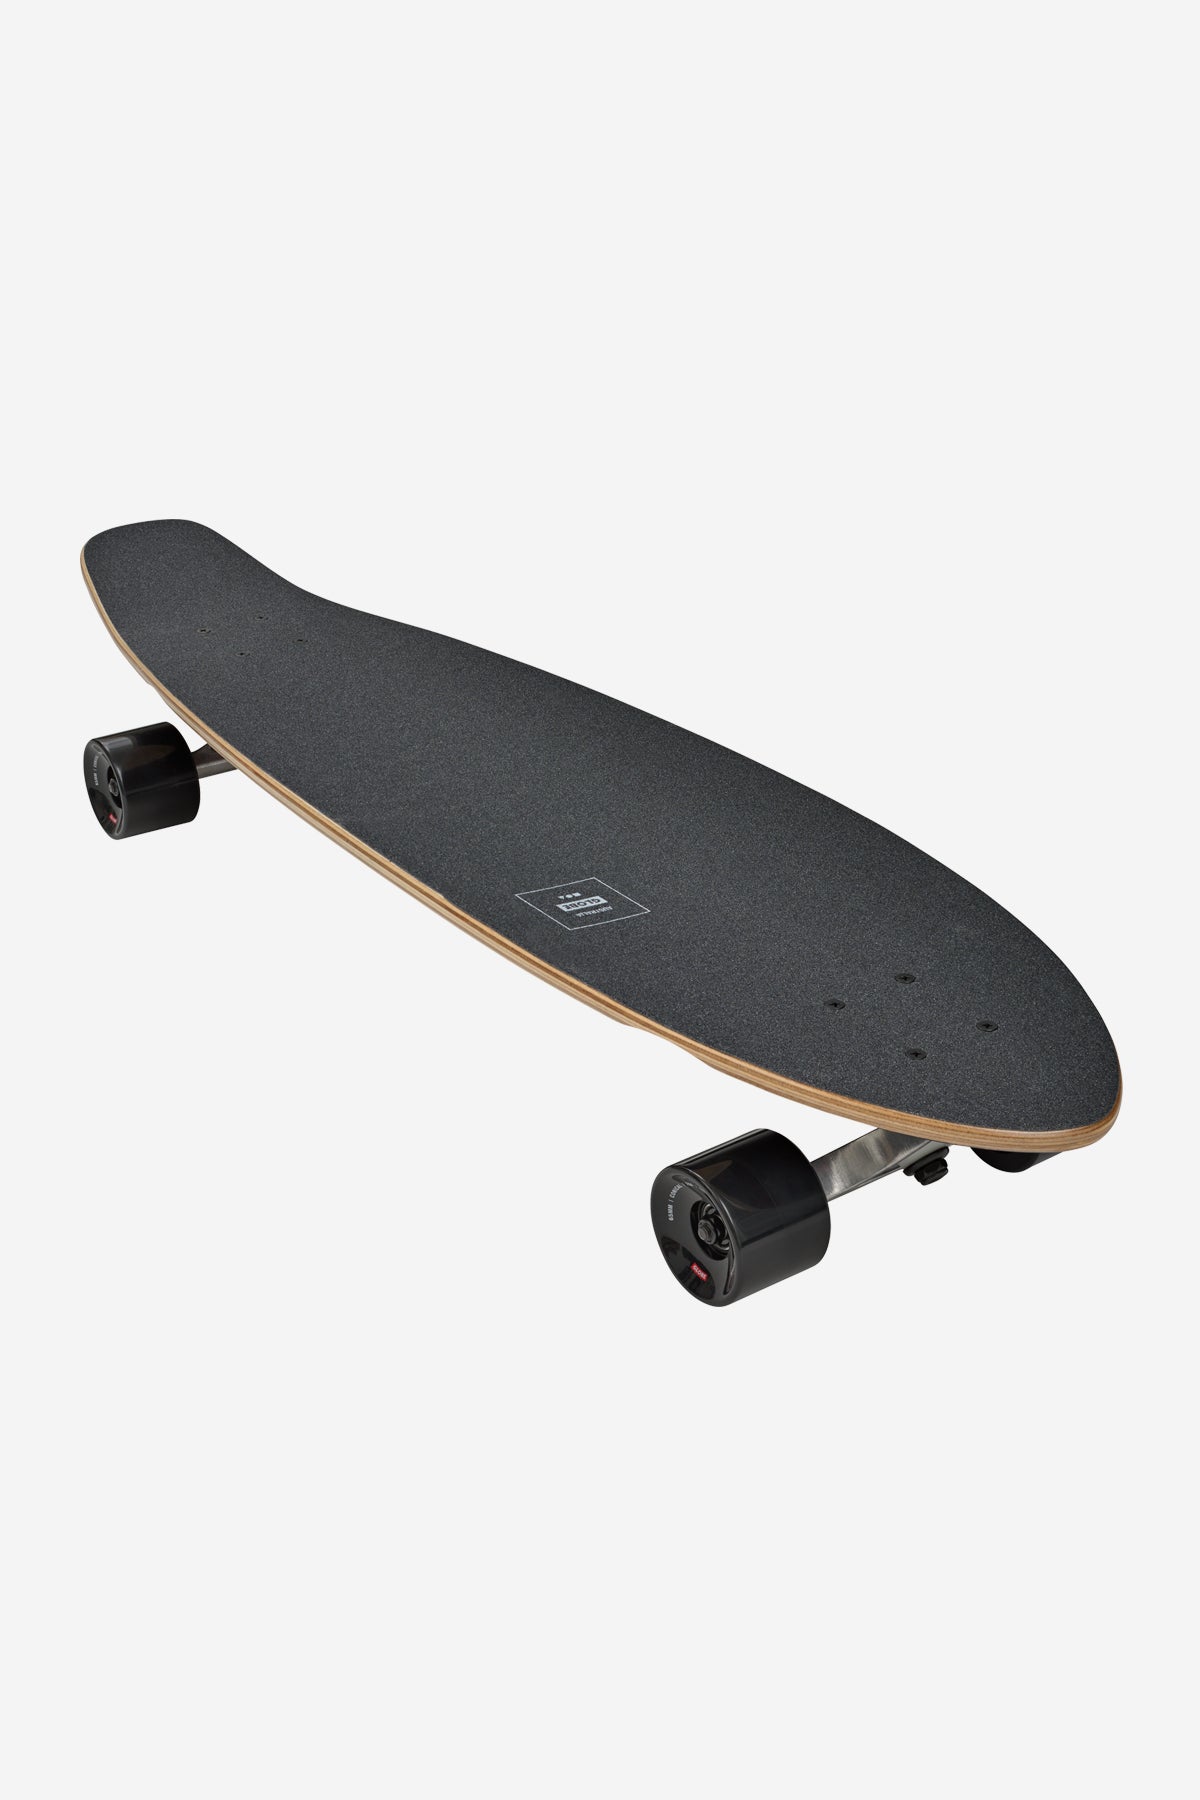 front angled view of The All-Time 35" Longboard